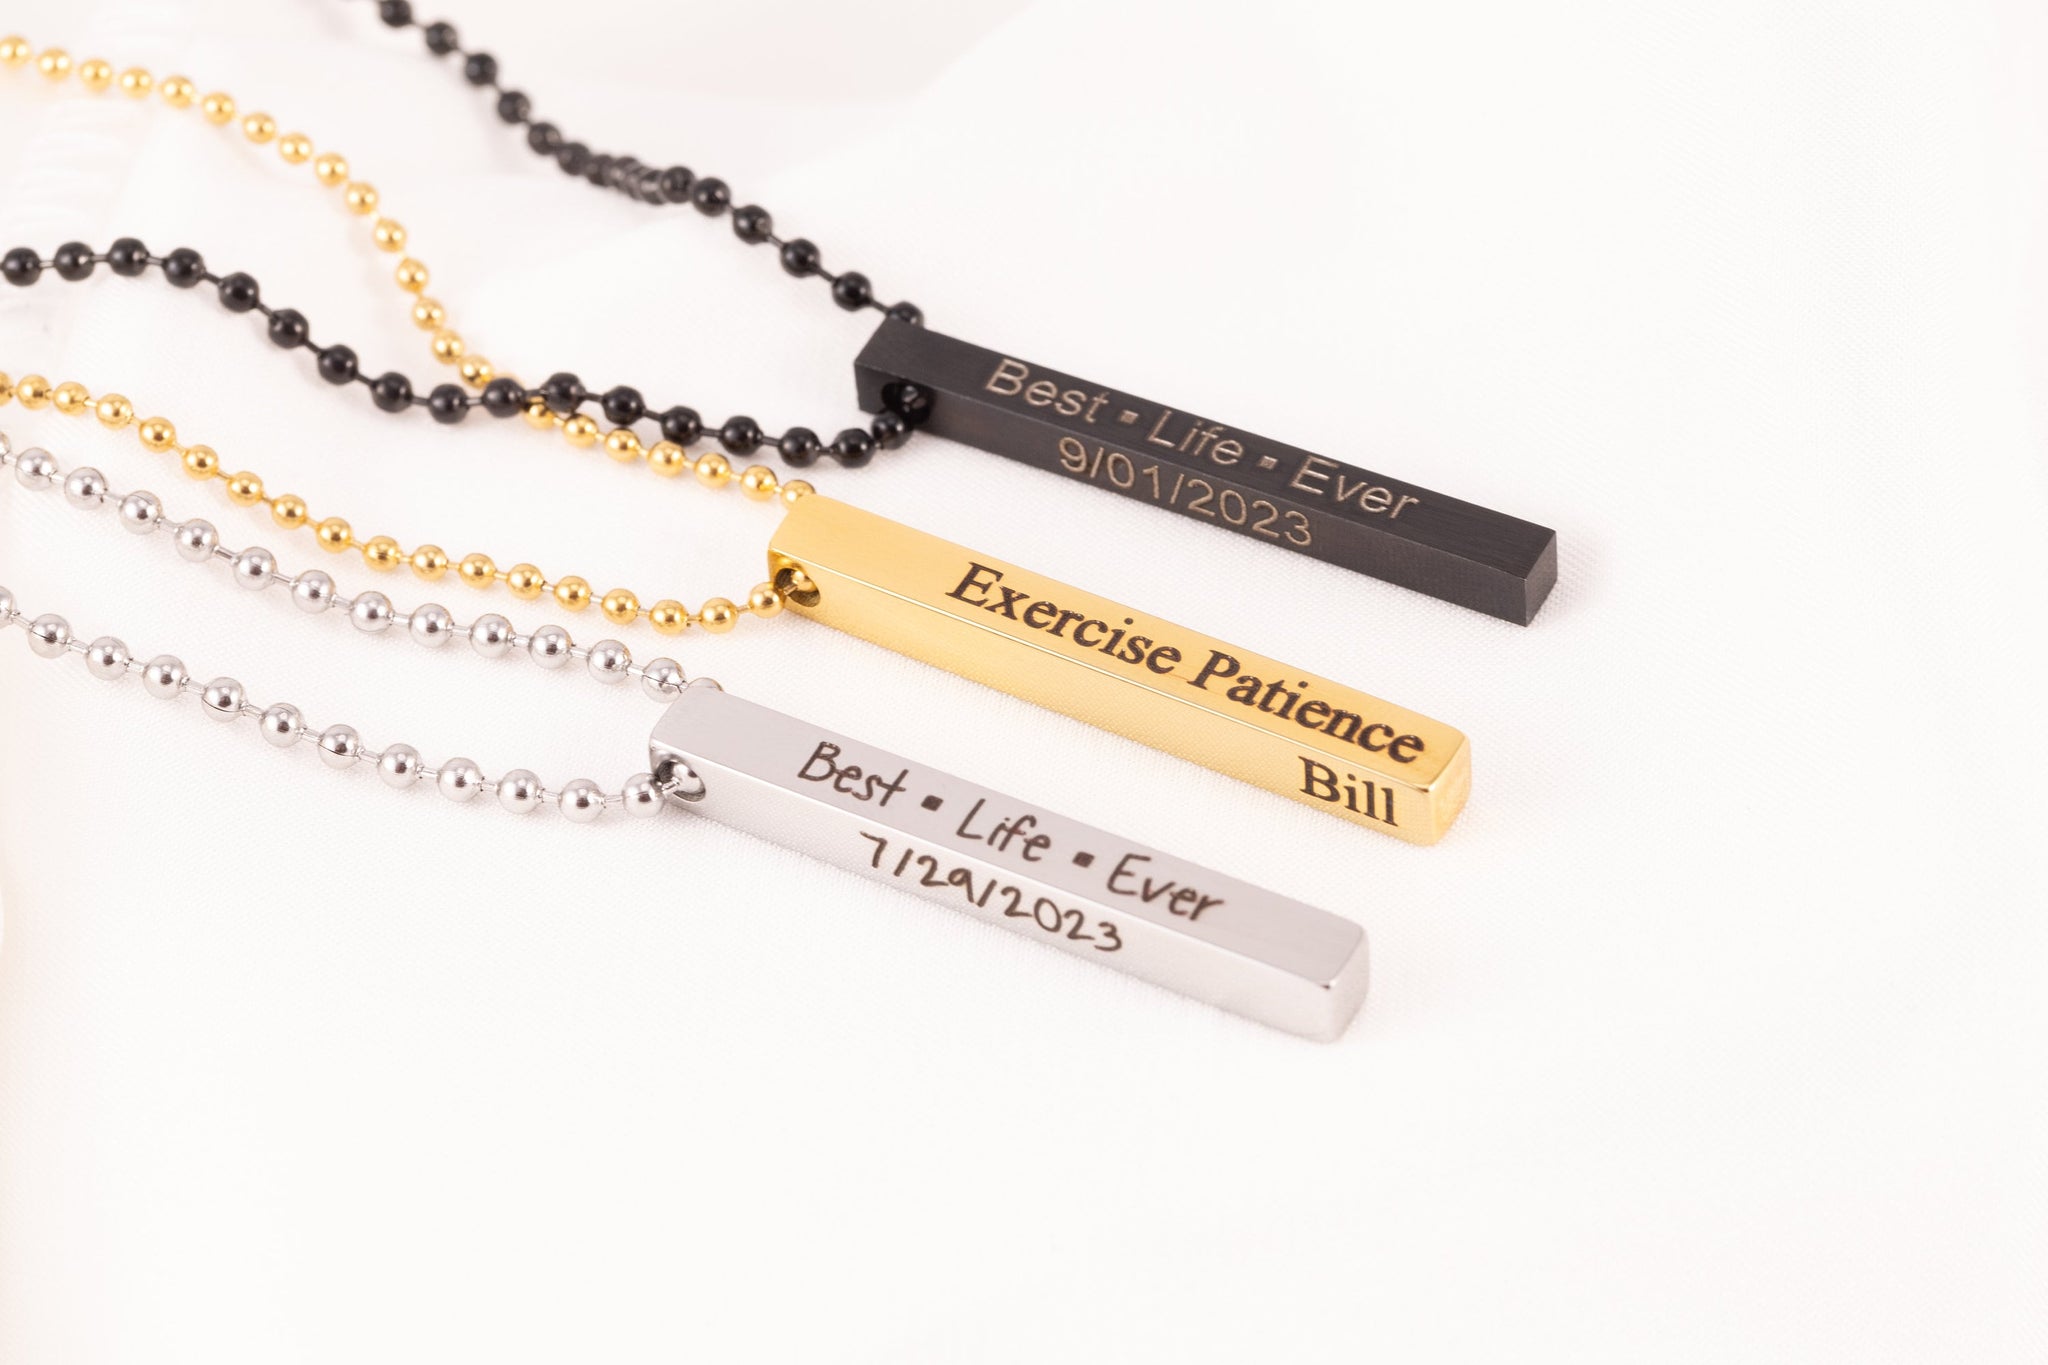 Best life ever necklace - JW gift - Jehovah's brother present - exercise Patience Necklace - jw baptism gift - Bar Necklace